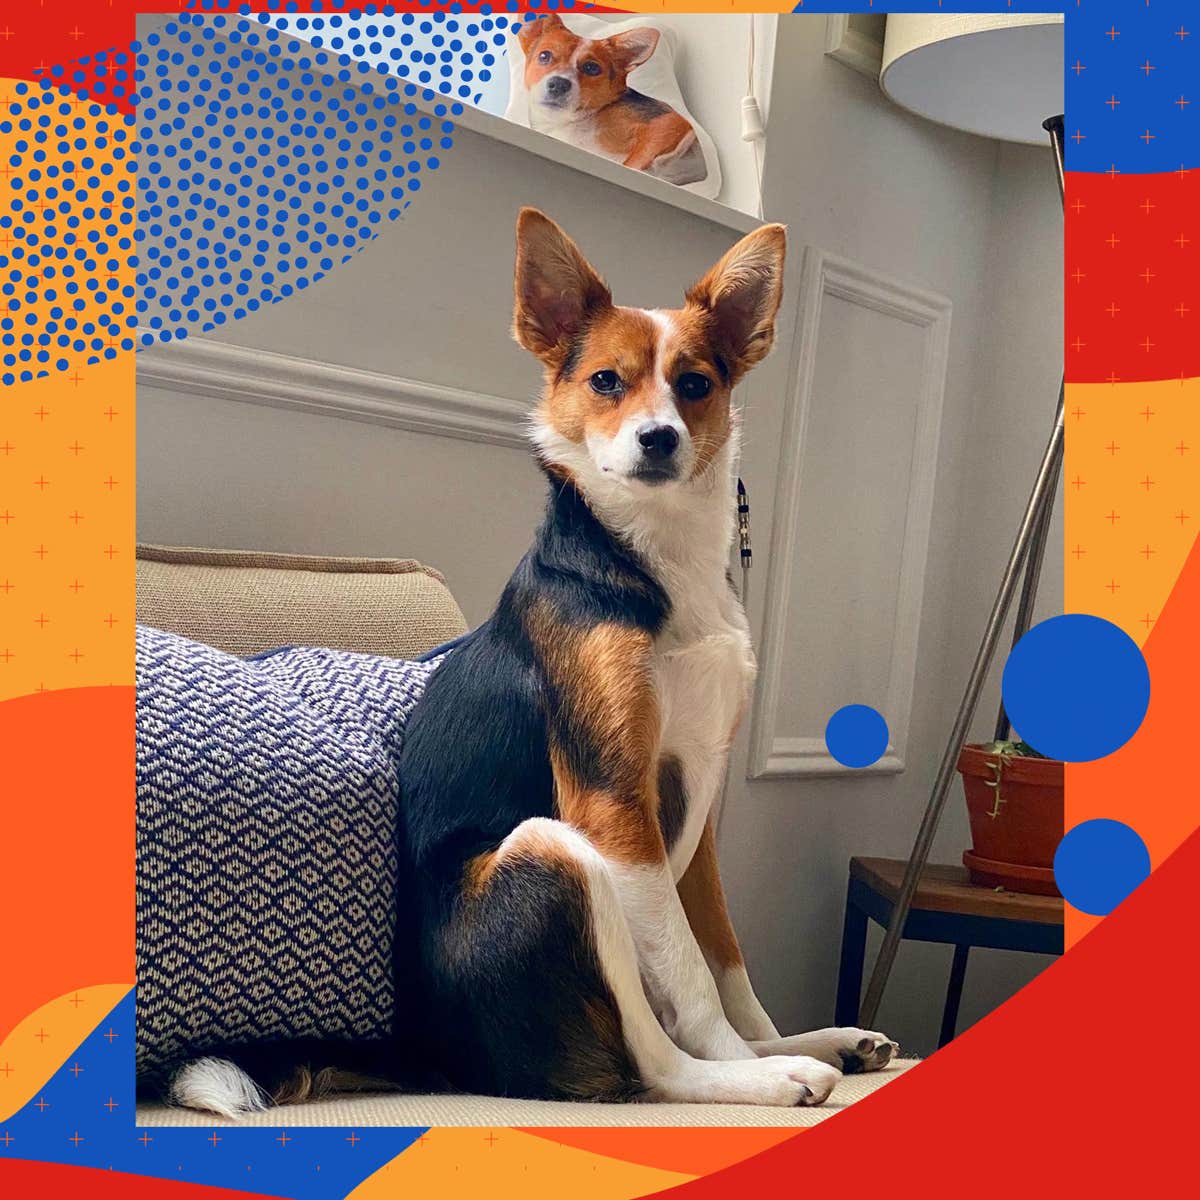 Meet Our Refinery29 Employee Pets: Dogs, Cats & More